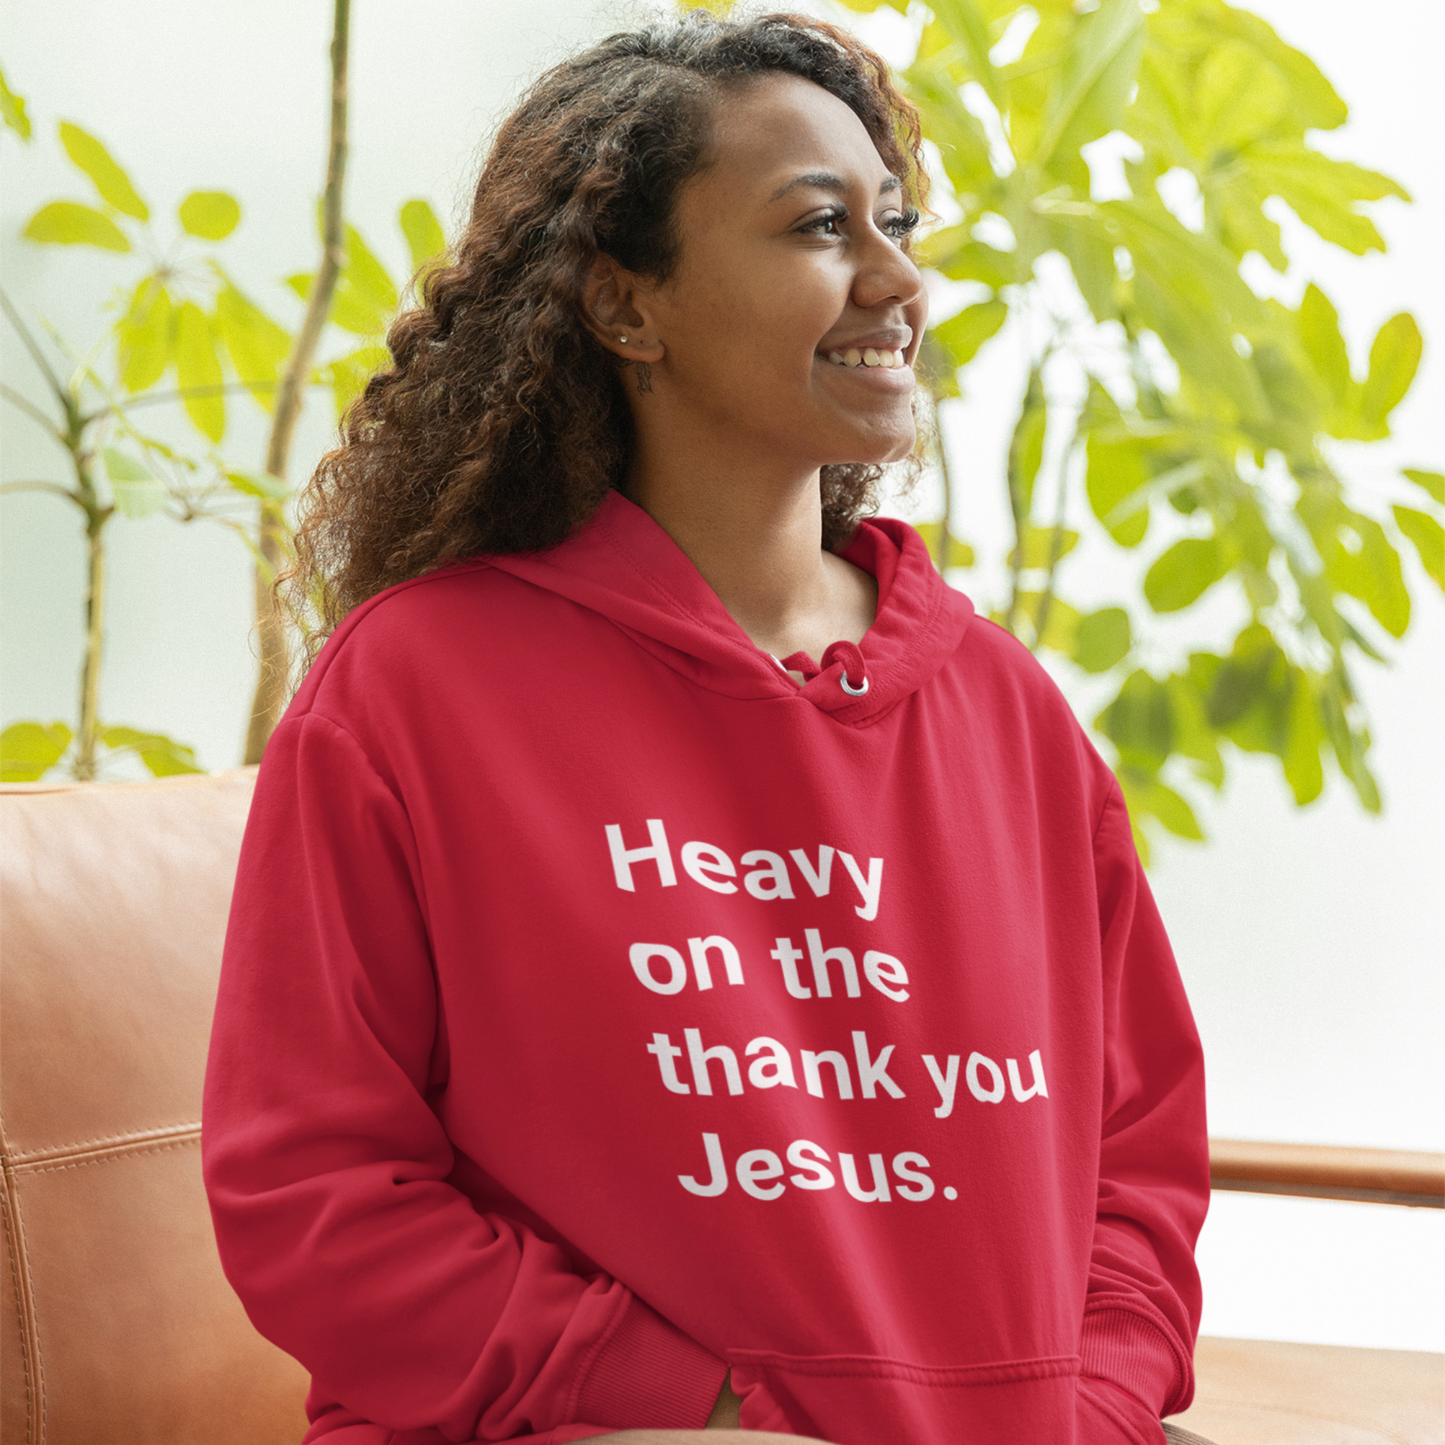 Heavy on the Thank you Jesus (Graphic White Text) Unisex Heavy Blend Hoodie - Style: Gildan 18500